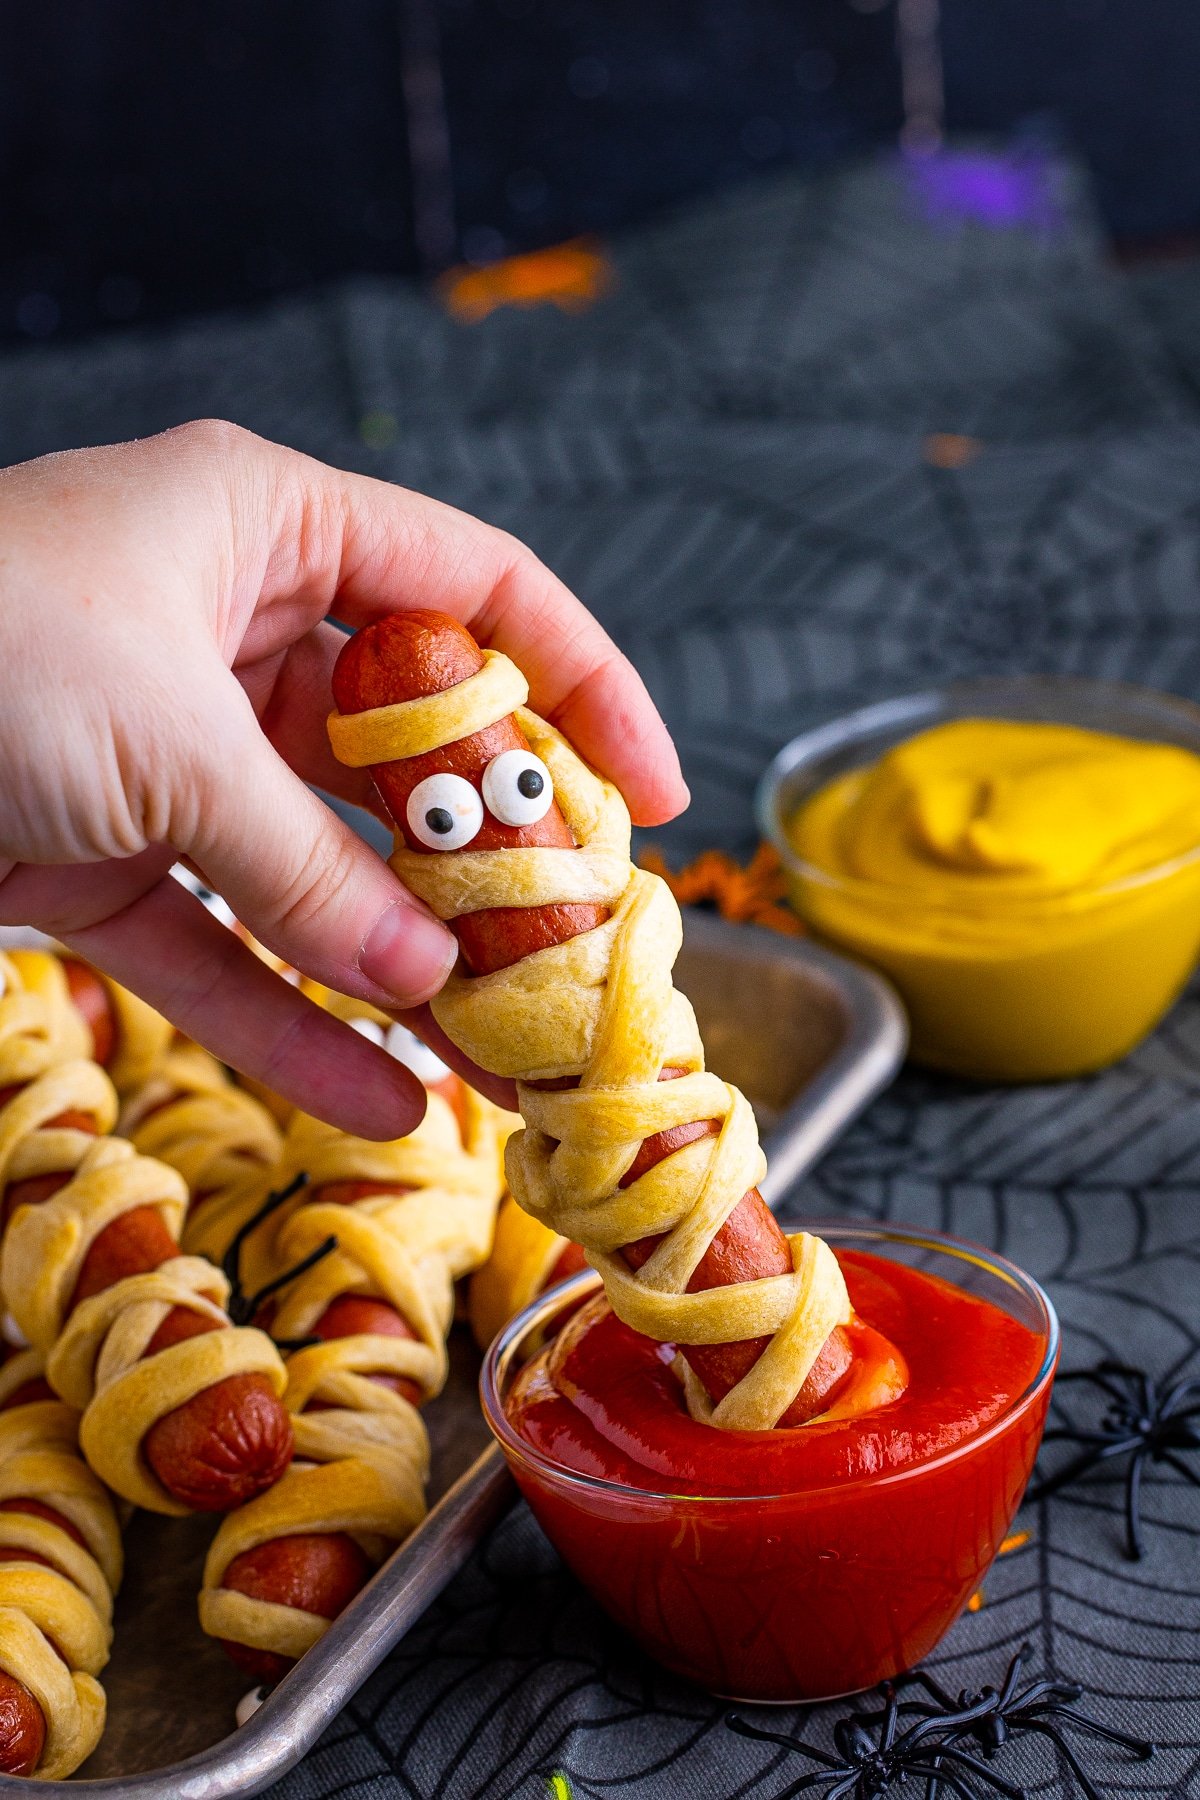 Hand dipping one hot dog in ketchup.